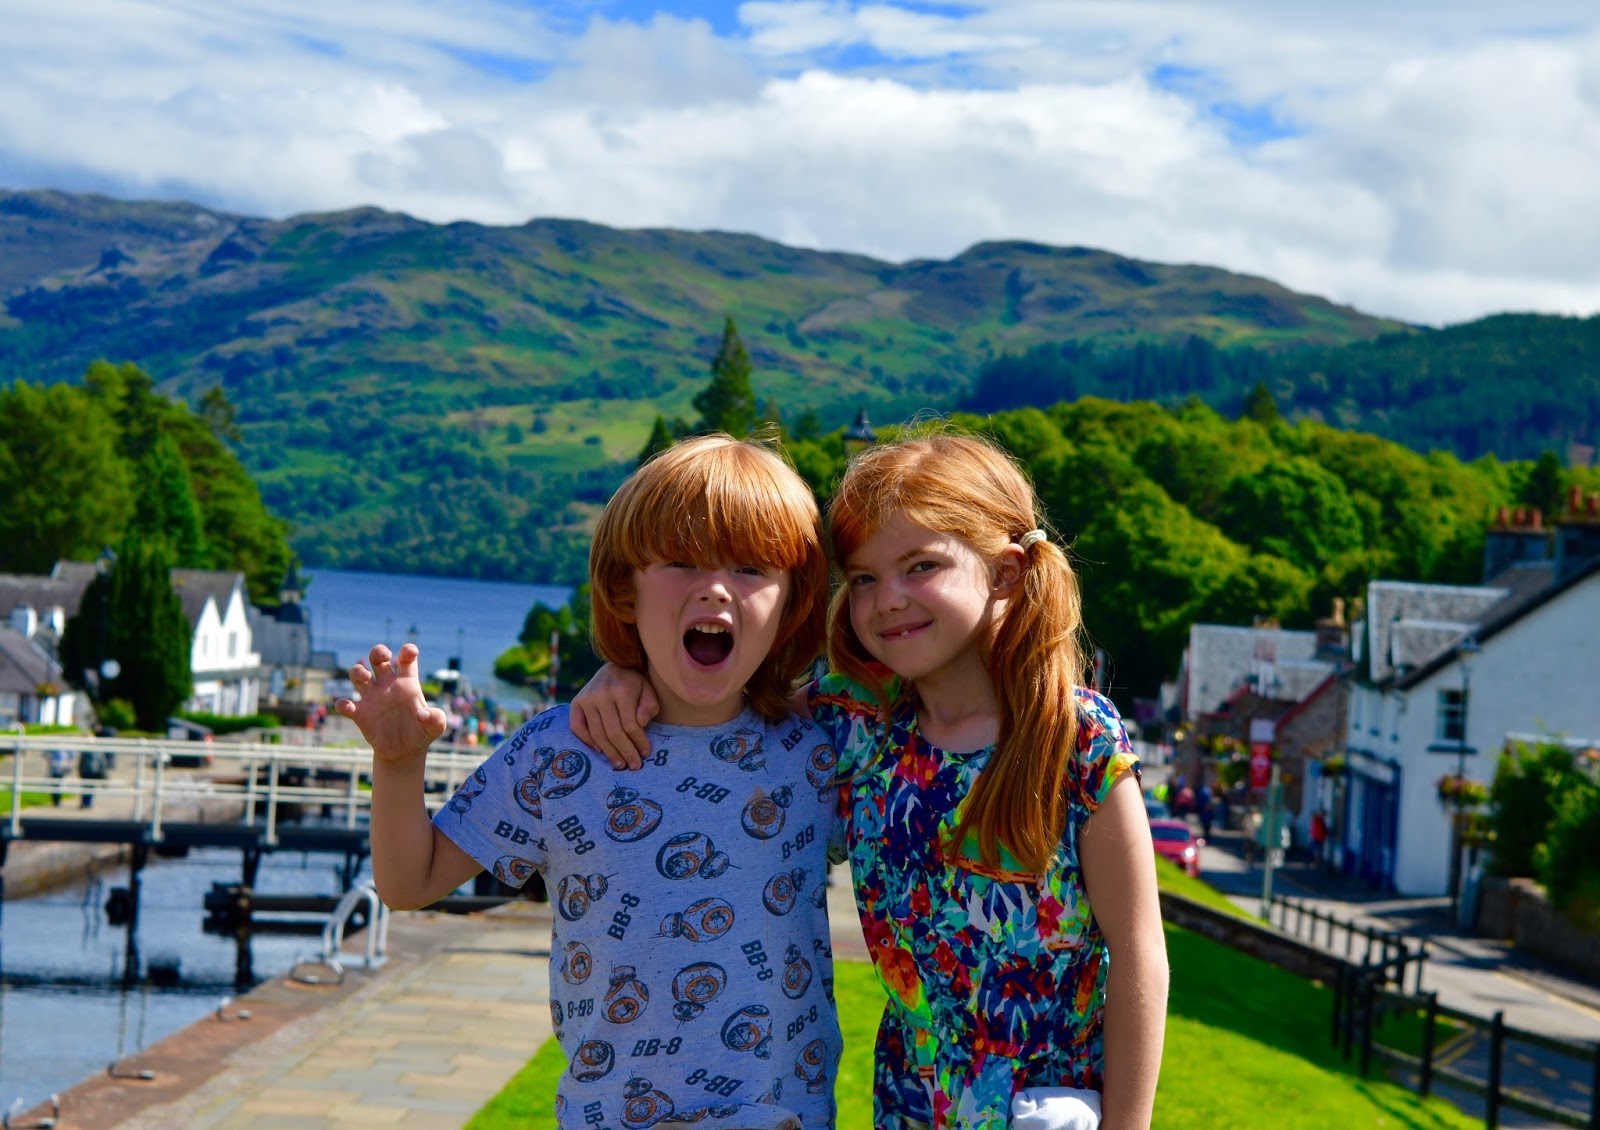 A Postcard from Fort Augustus, Loch Ness